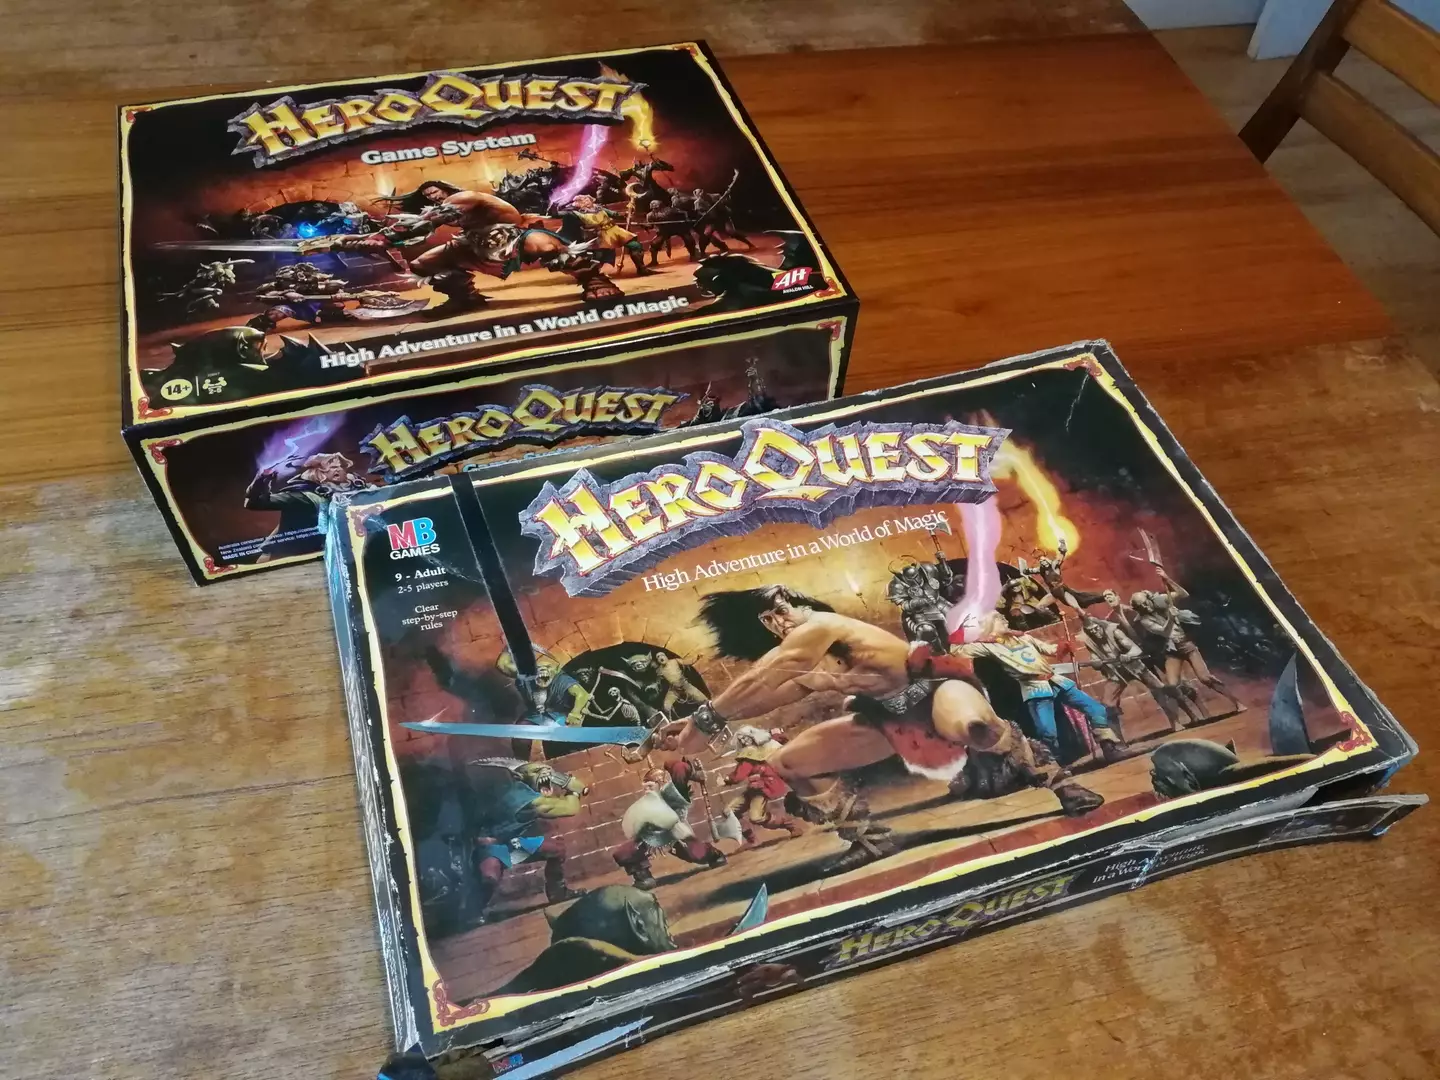 Here’s my old (battered, loved) HeroQuest next to the new version /